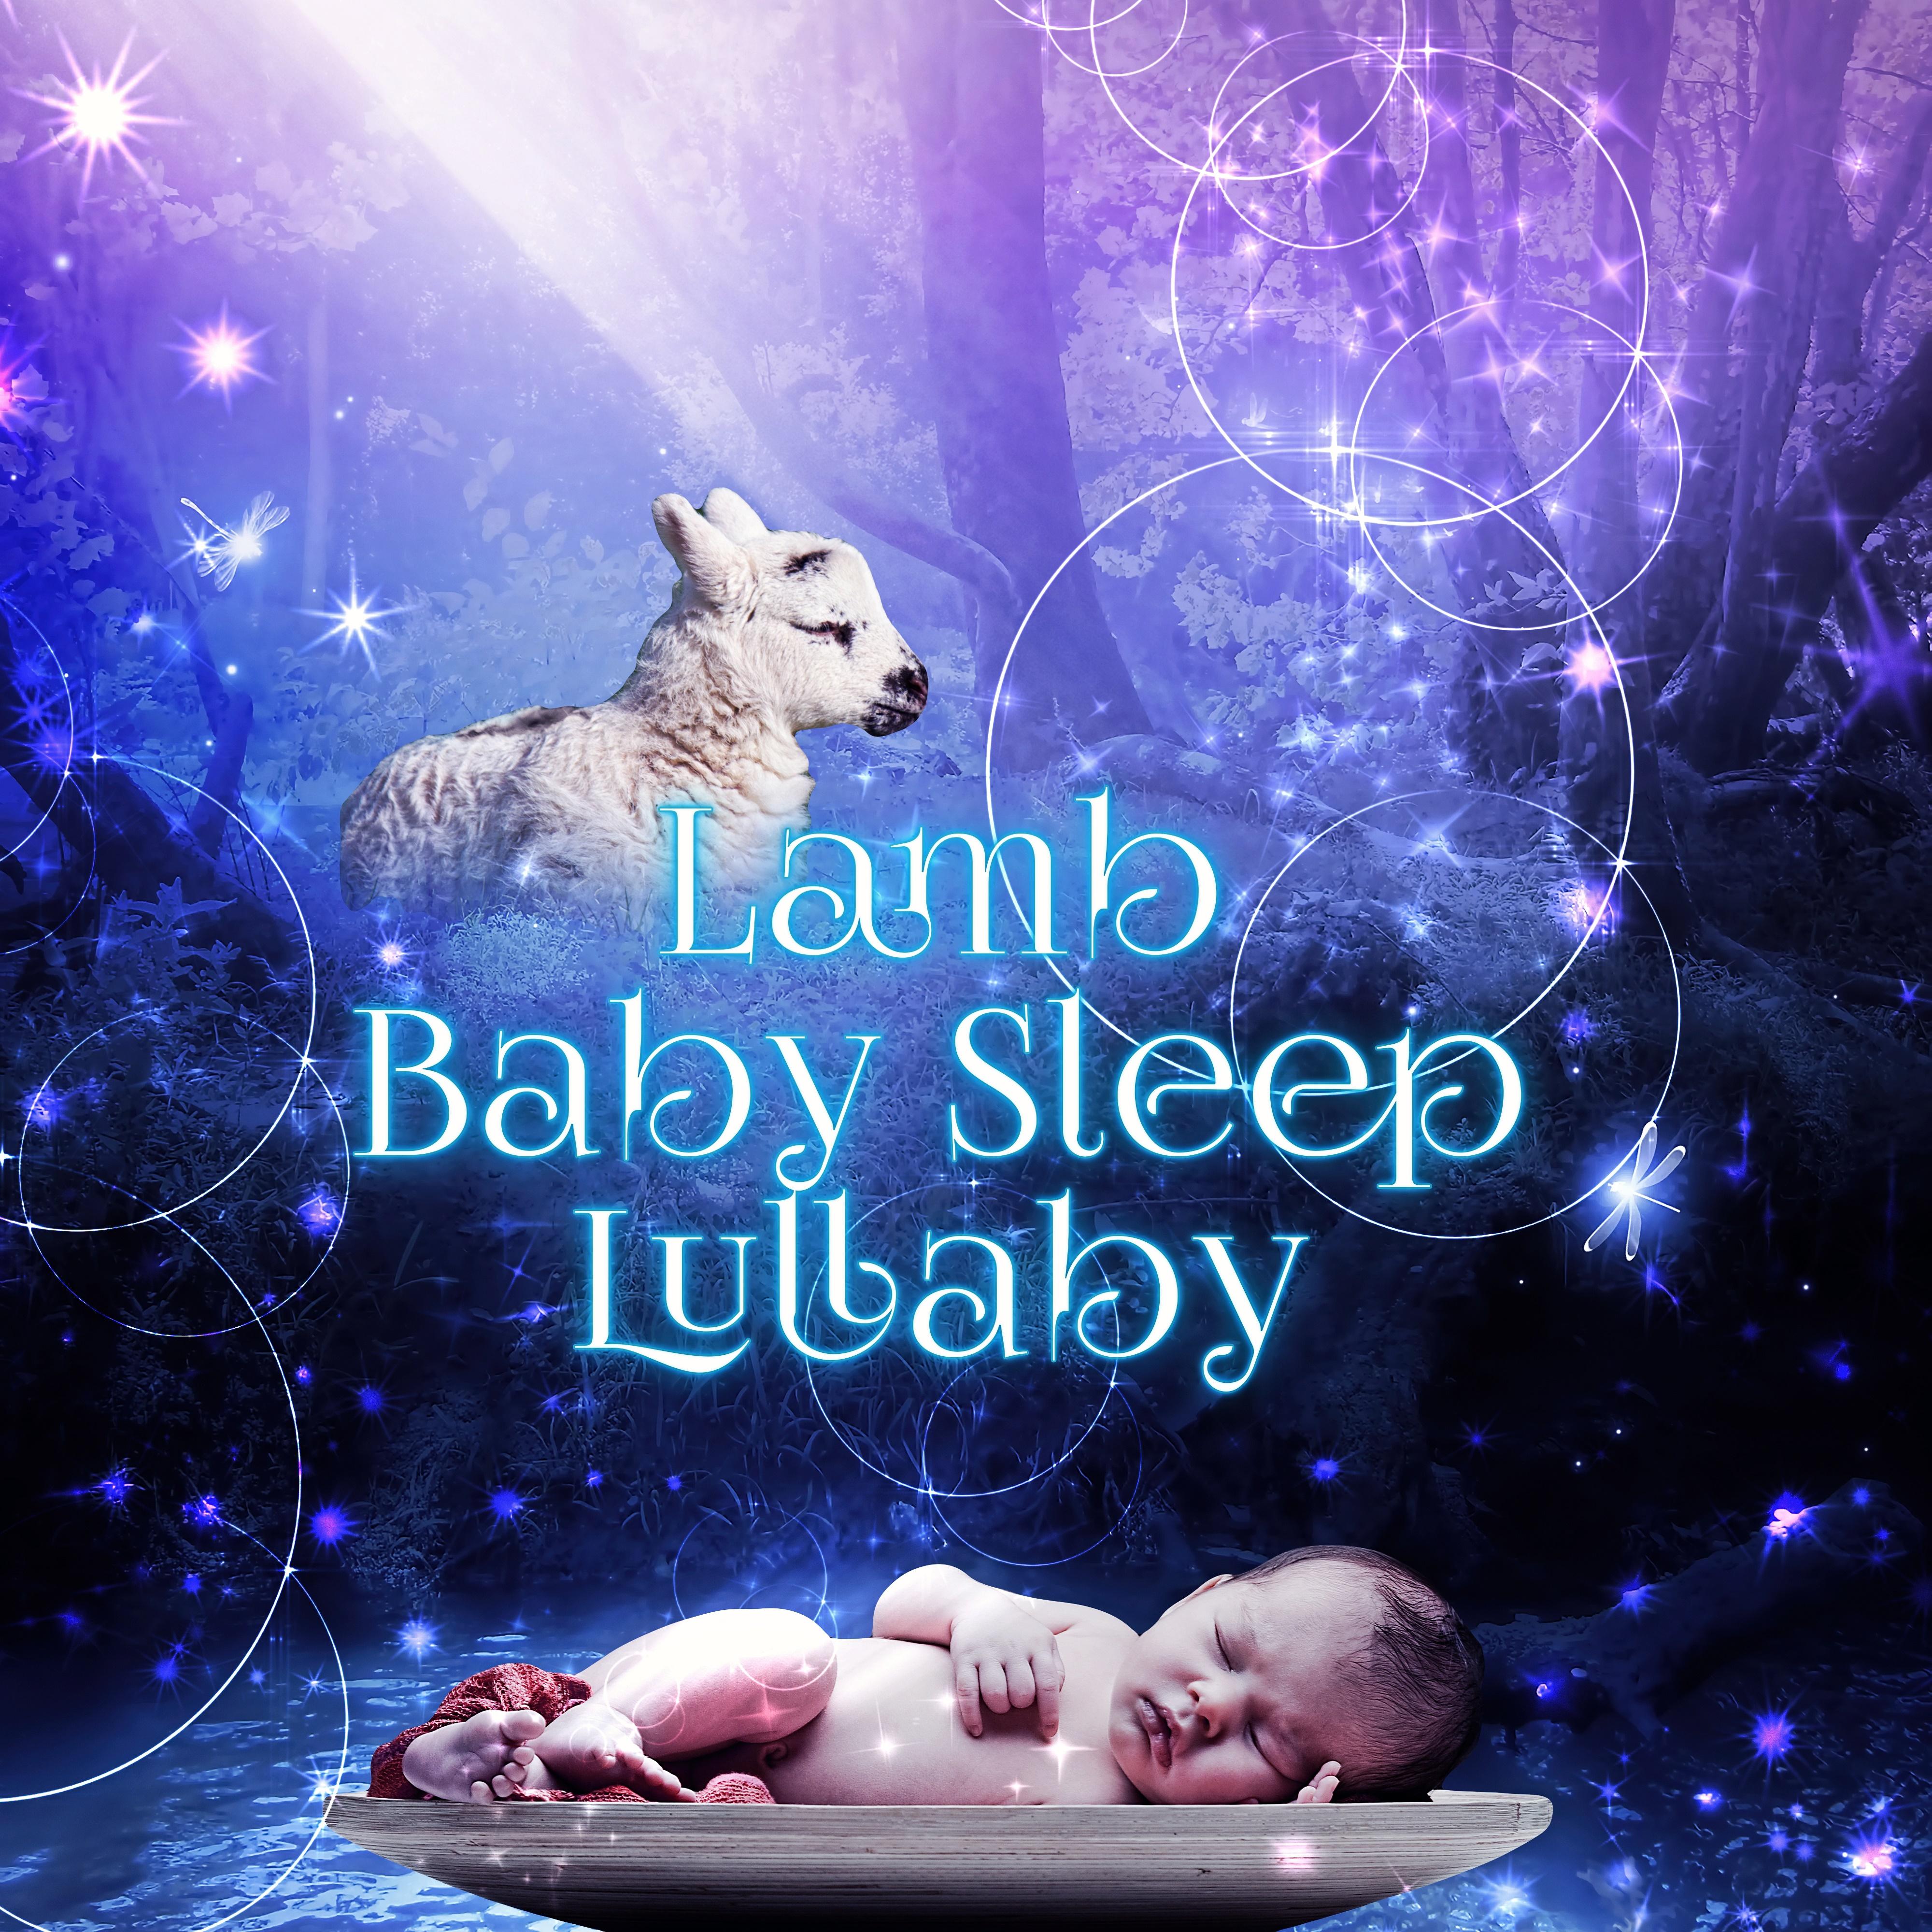 LAMB - Baby Sleep Lullaby, Soothing Music, Relaxing Nature Sounds, Beautiful Sleep Music, Calming Down Melodies, White Noises for Deep Sleep